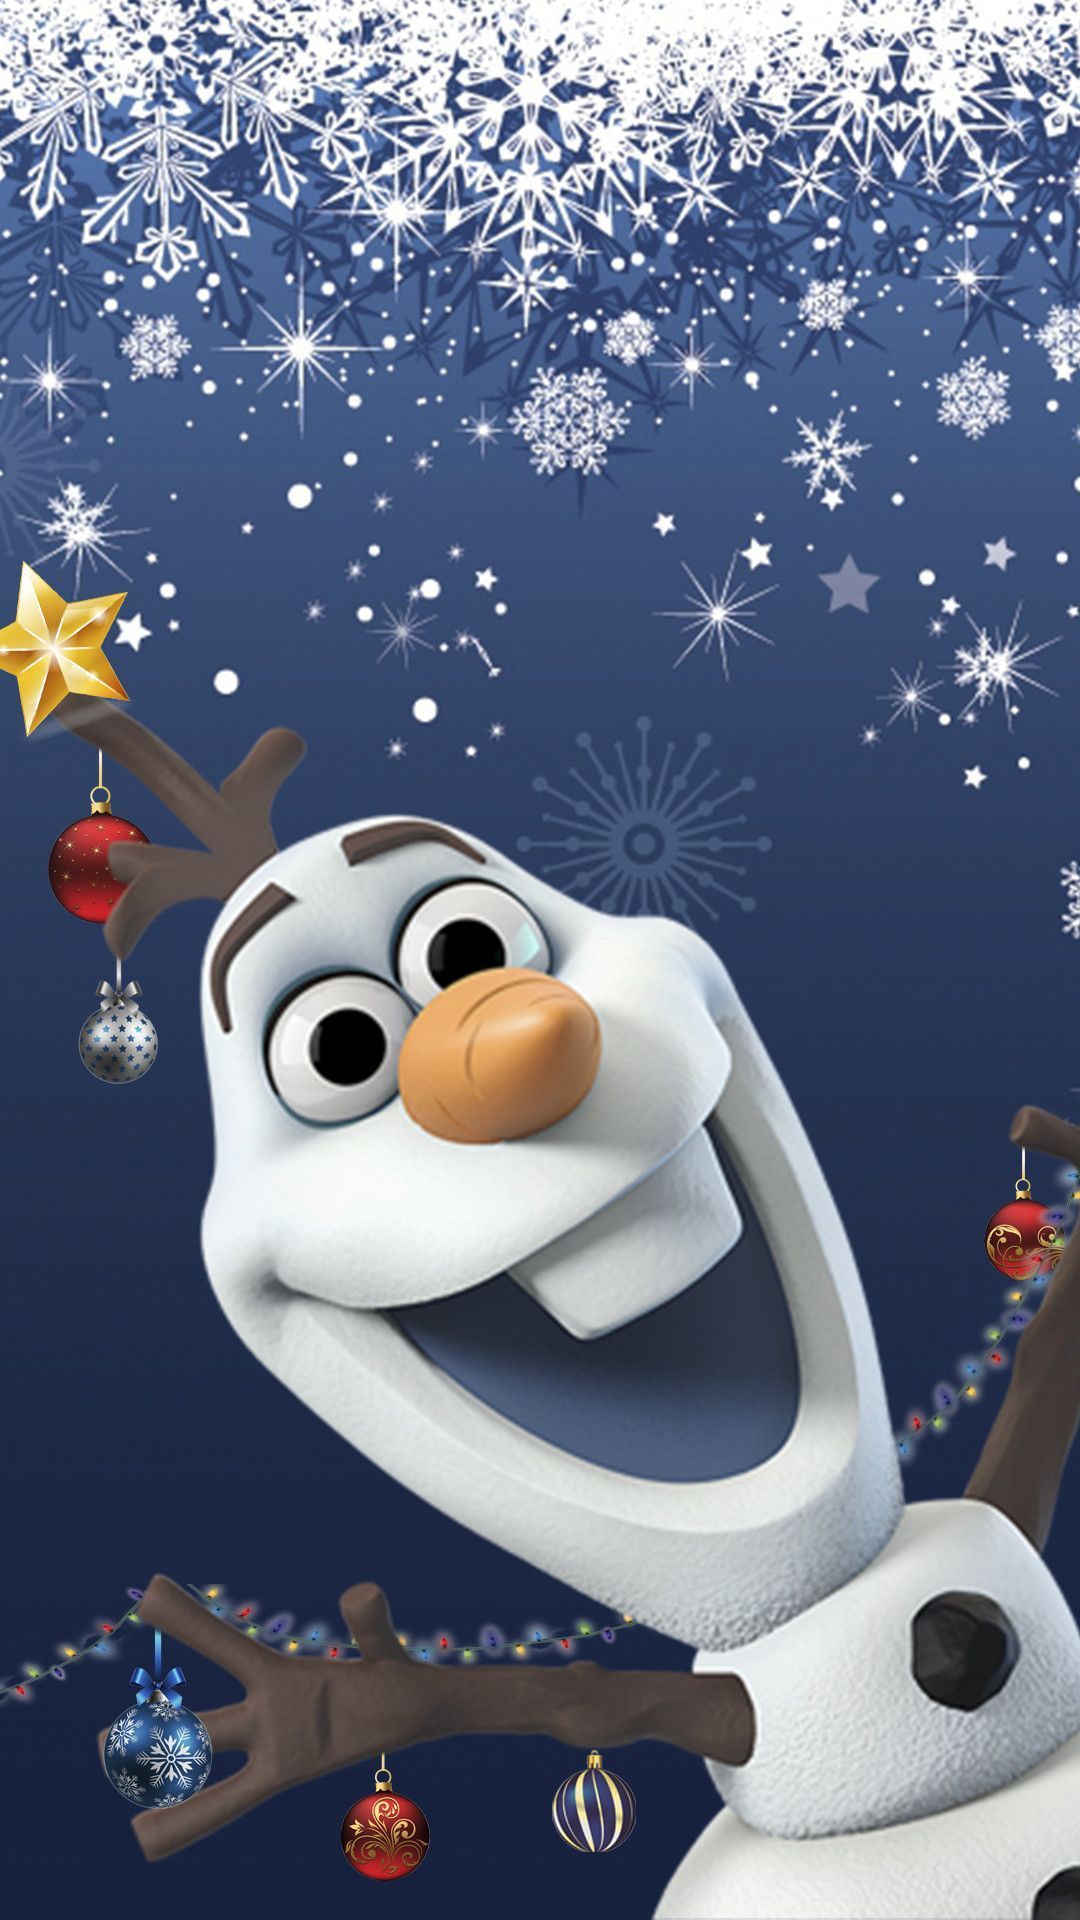 Christmas Olaf iPhone Wallpaper Free Christmas Olaf iPhone Background